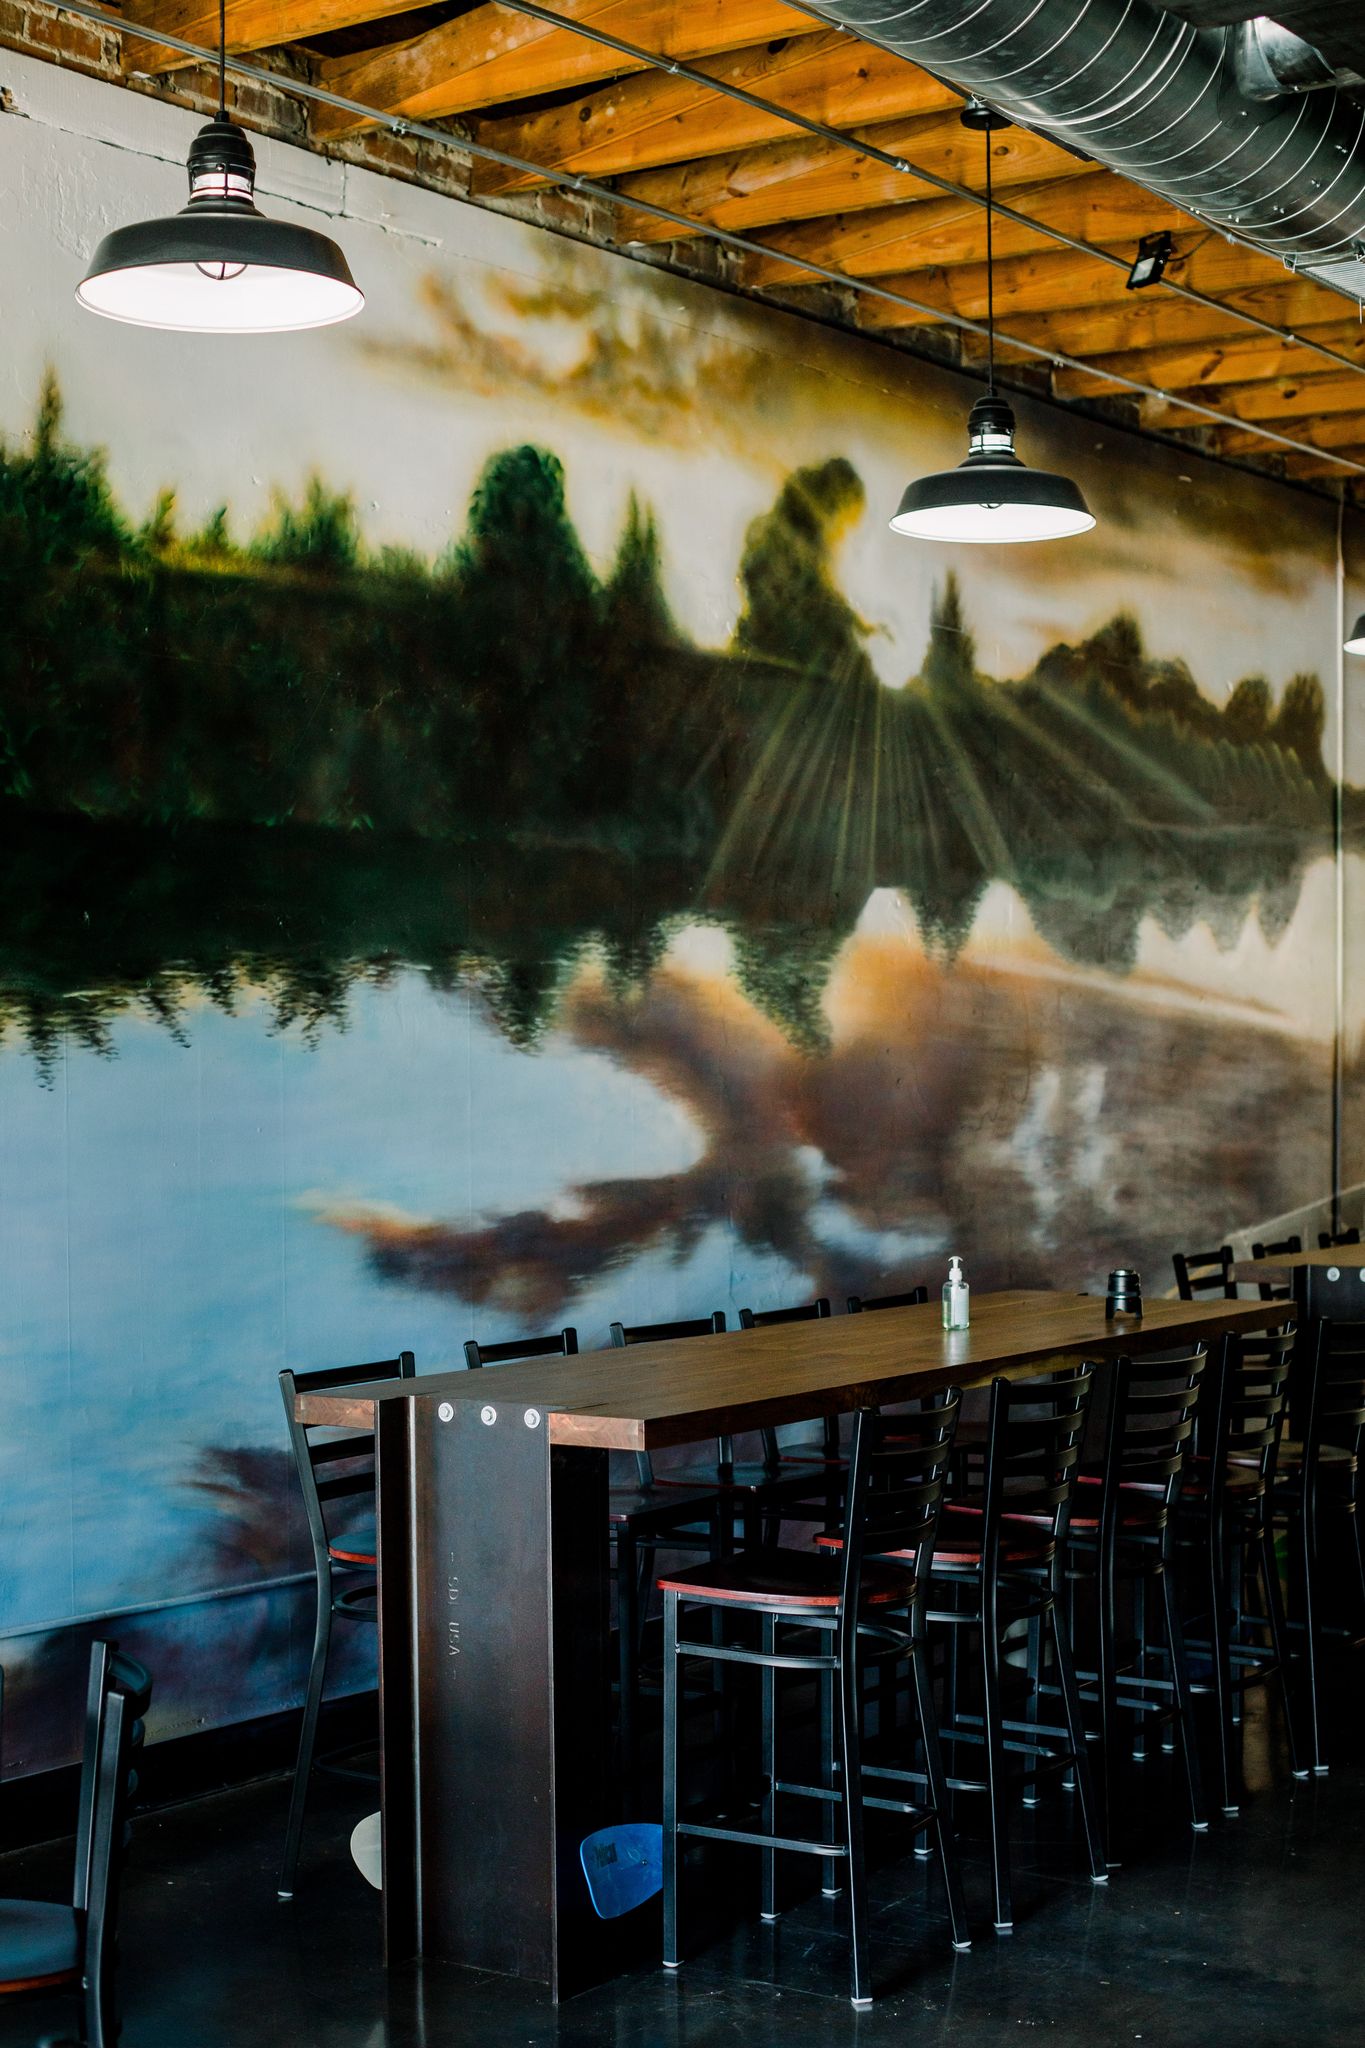 A mural on the back wall of Paddled South Brewing Co. in High Point, NC is behind long friendship tables.